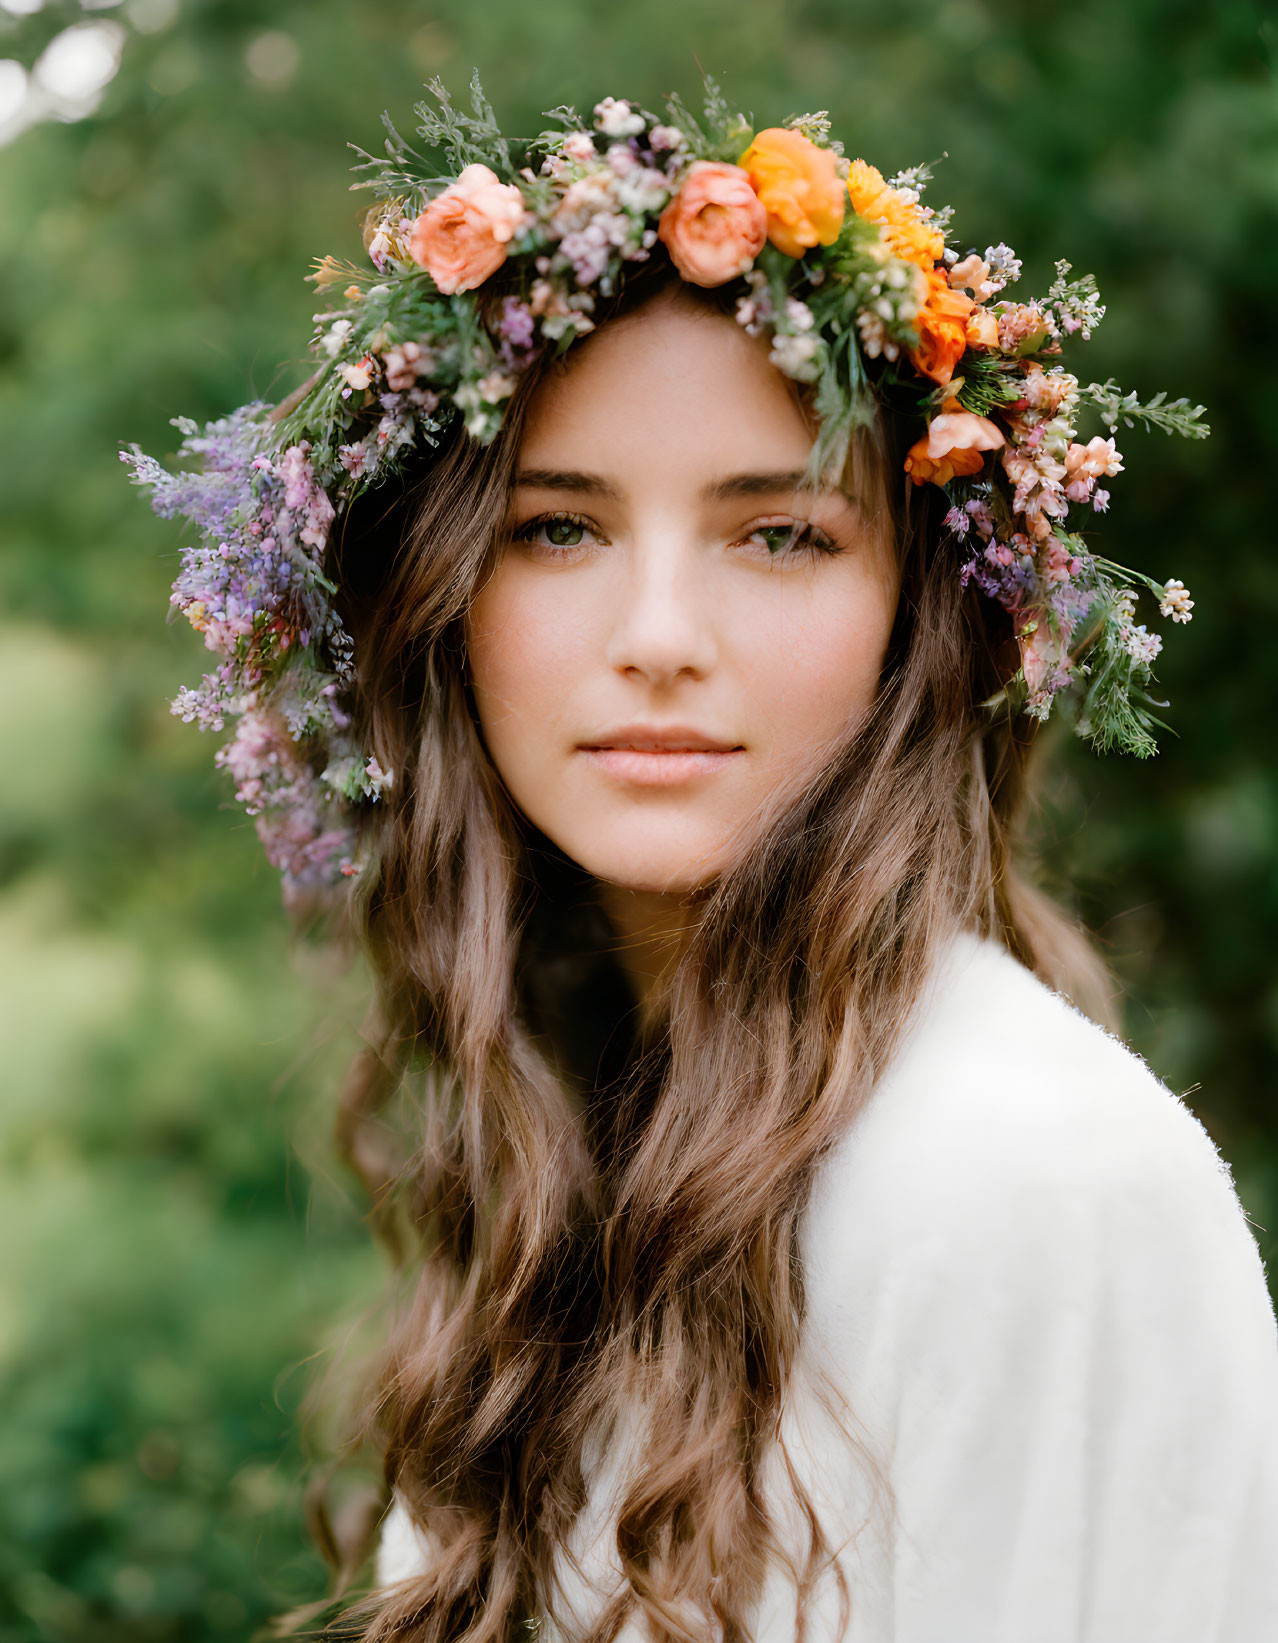 Woman with Long Wavy Hair in Vibrant Floral Crown Outdoors